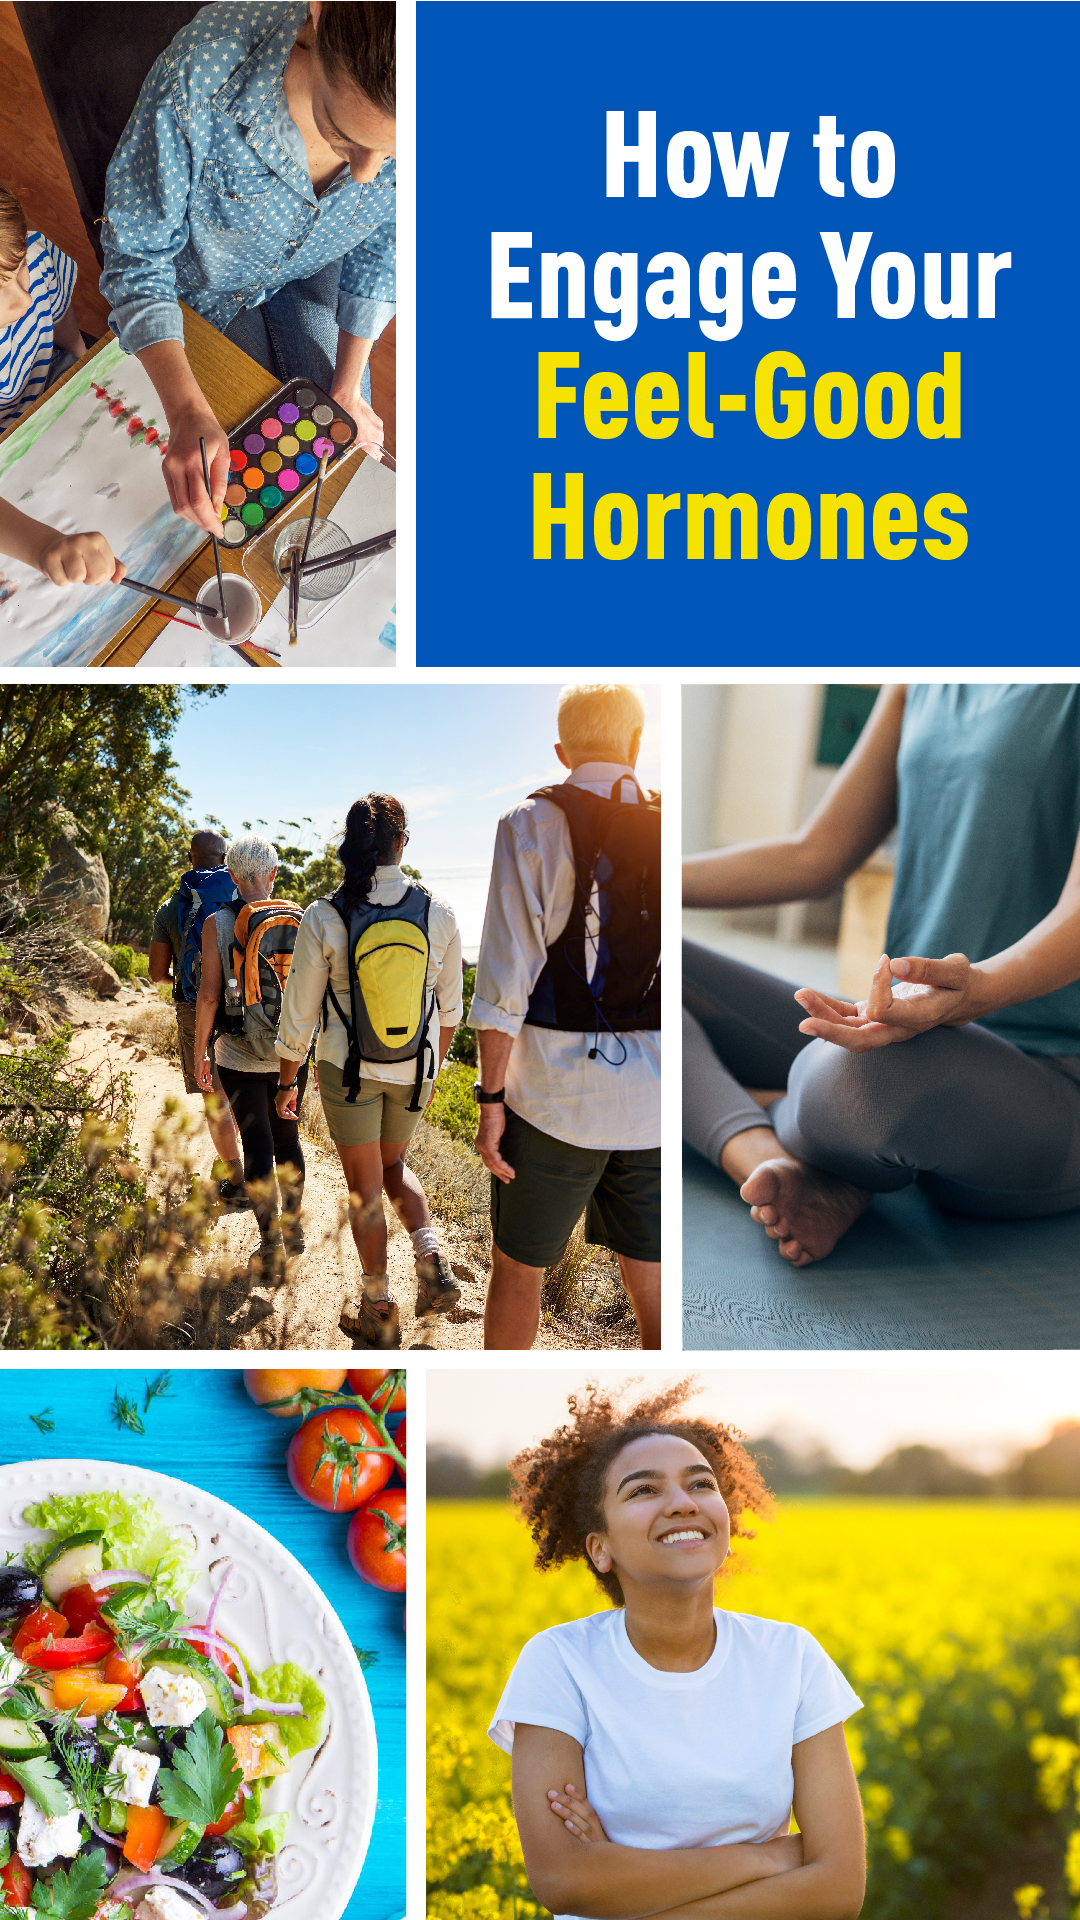 Tips for How to Engage Your Feel-Good Hormones